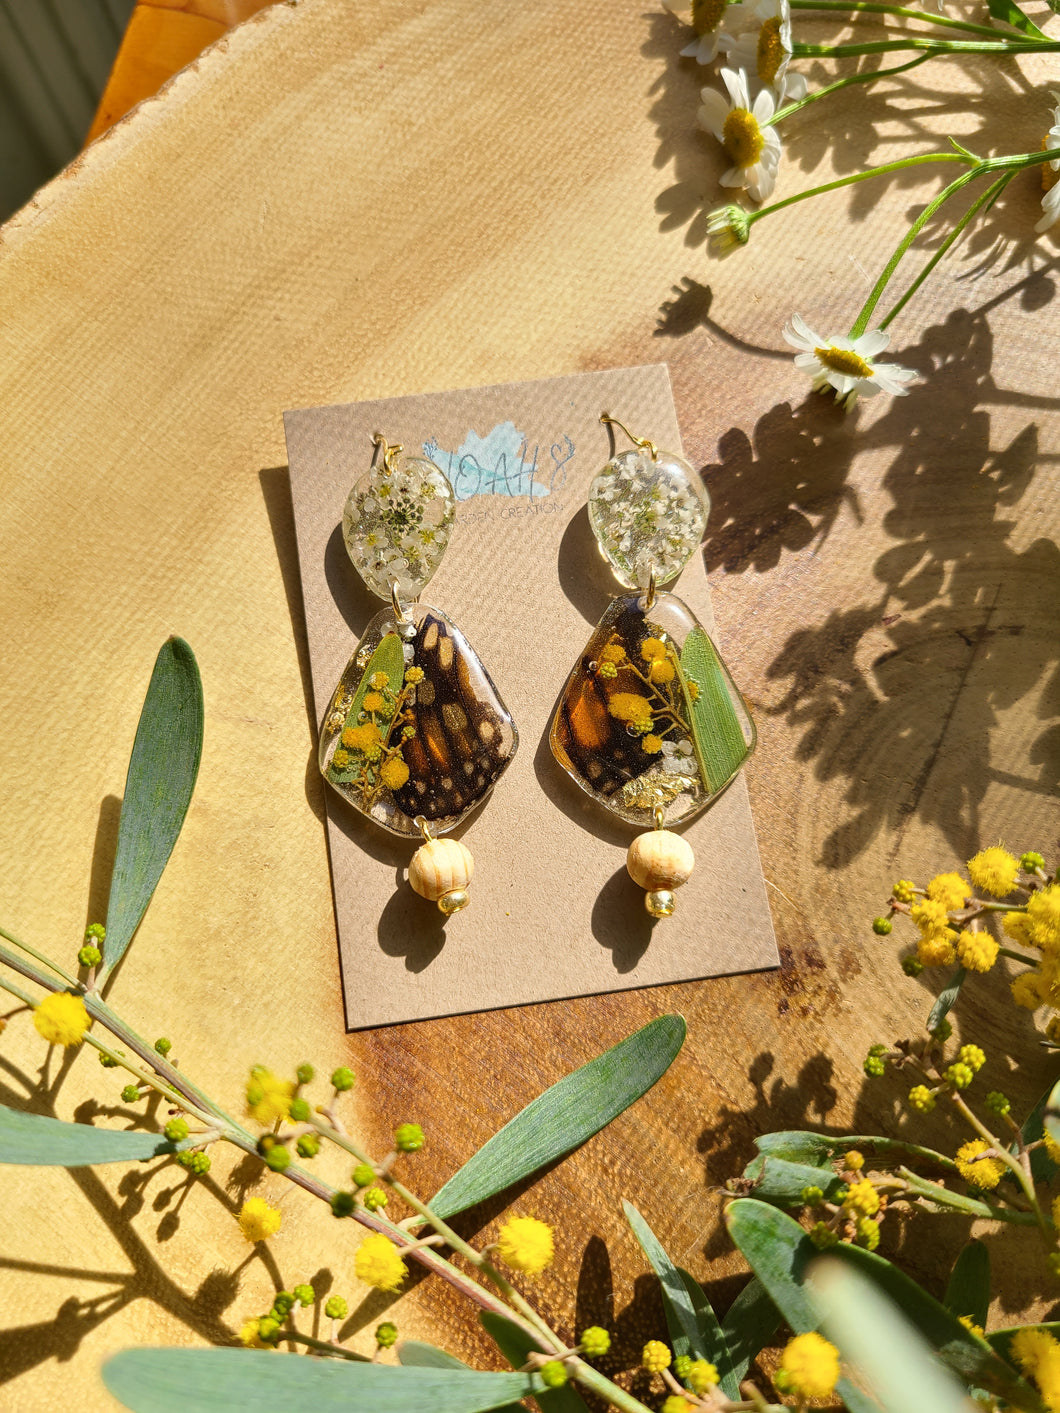 Spring Butterfly Collection- embedded Monarch Wings in resin, small tear drop shaped, wooden beads